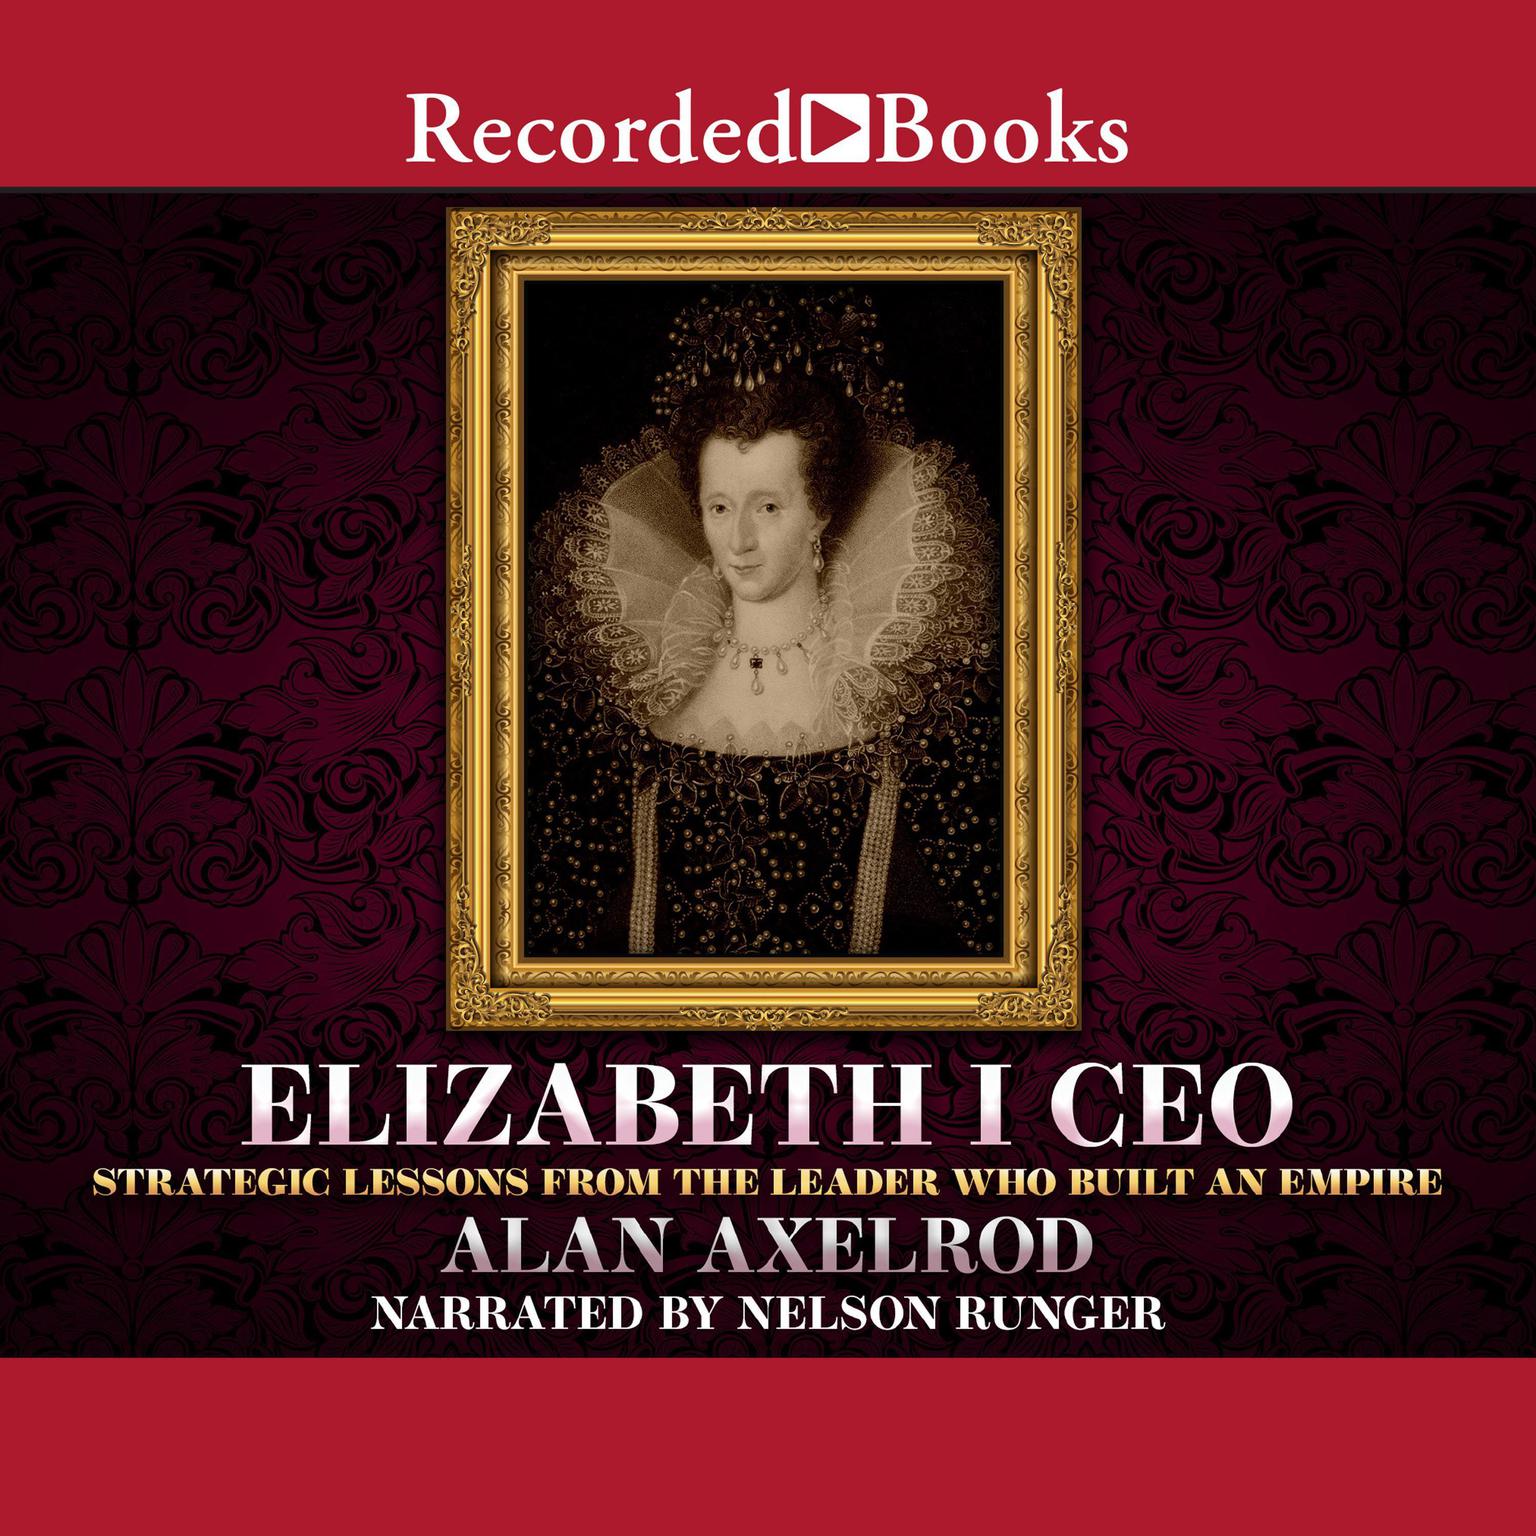 Elizabeth I CEO: Strategic Lessons from the Leader Who Built an Empire Audiobook, by Alan Axelrod